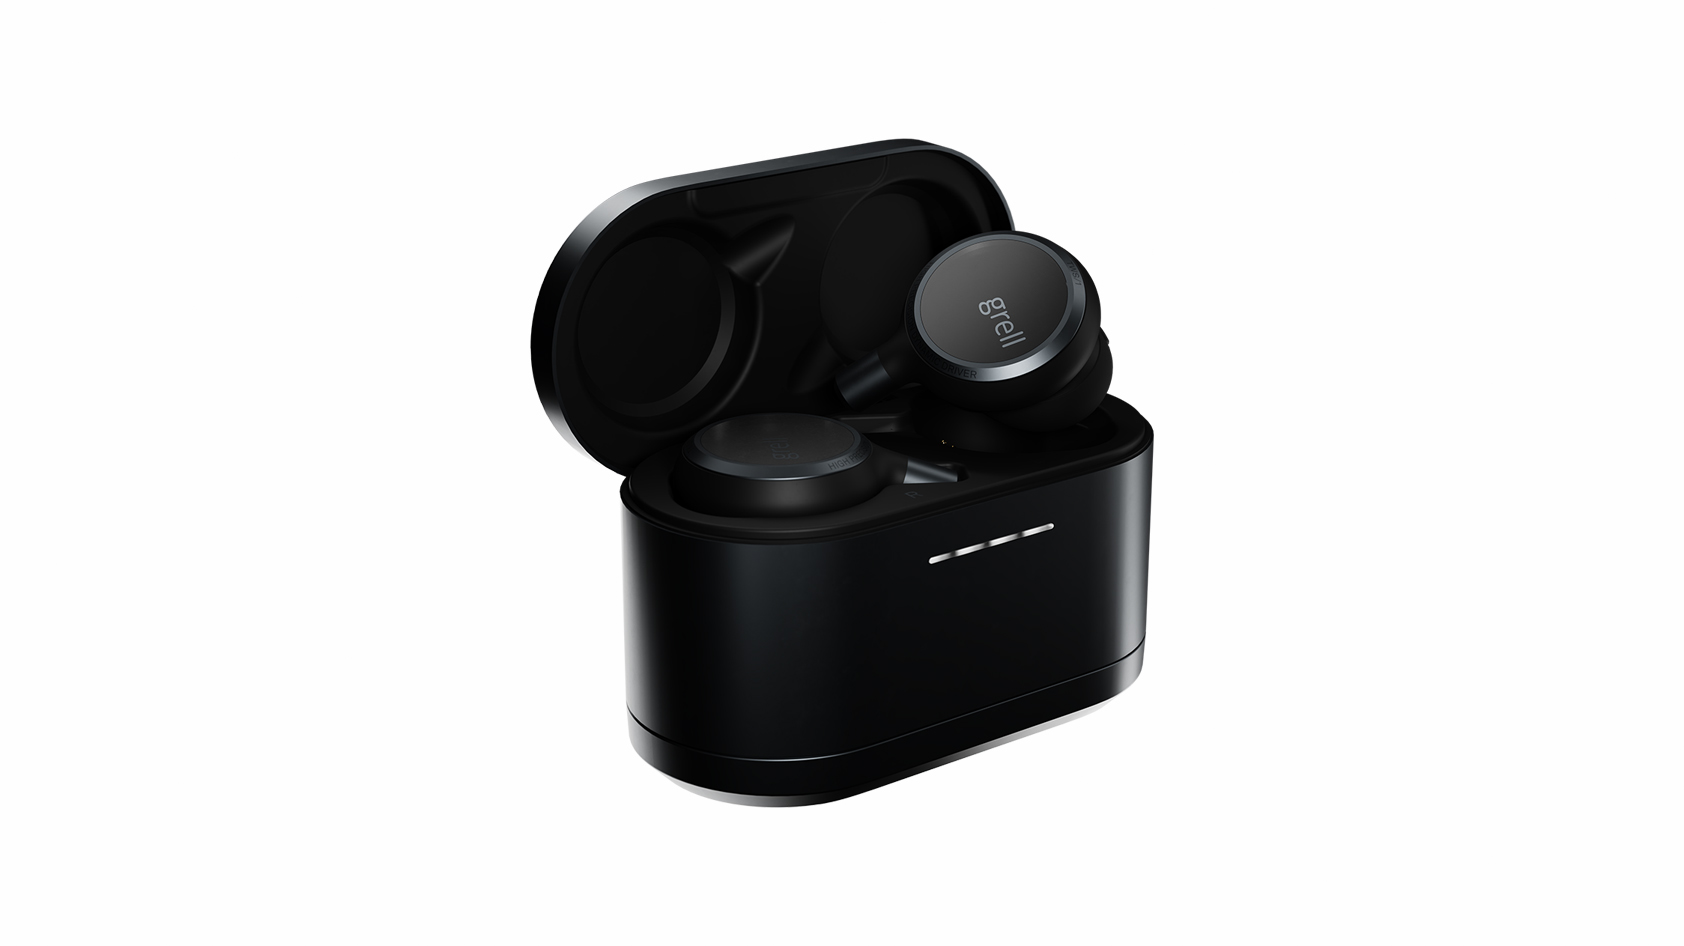 The Grell Audio TWS 1 earbuds and case in black against a white background.